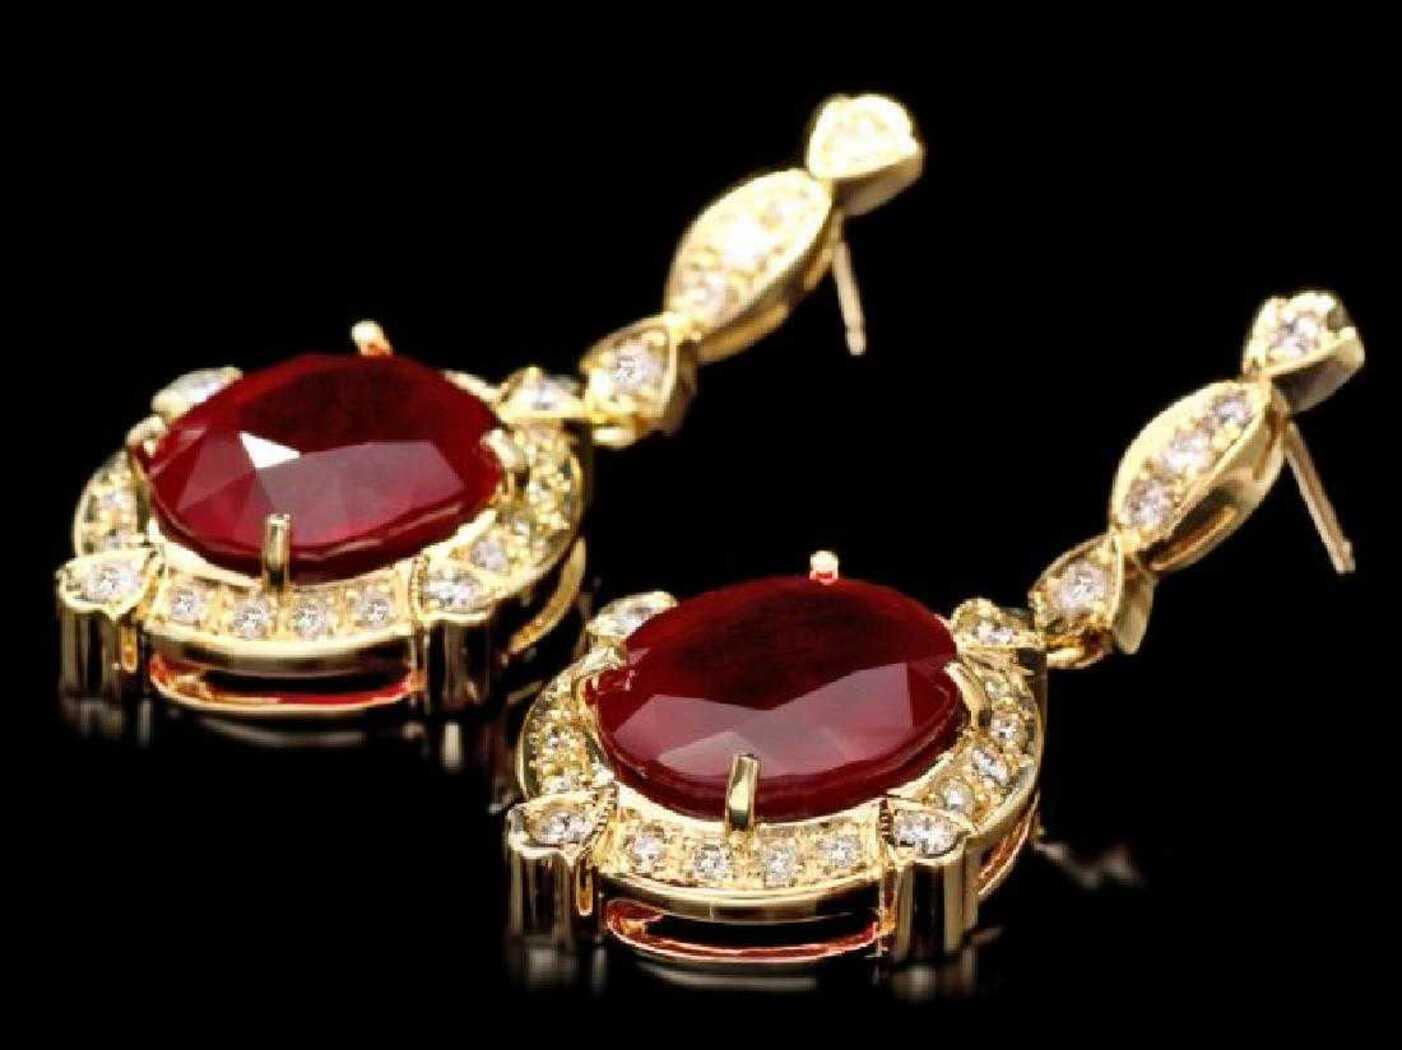 14K Yellow Gold 21.36ct Ruby and 1.32ct Diamond Earrings